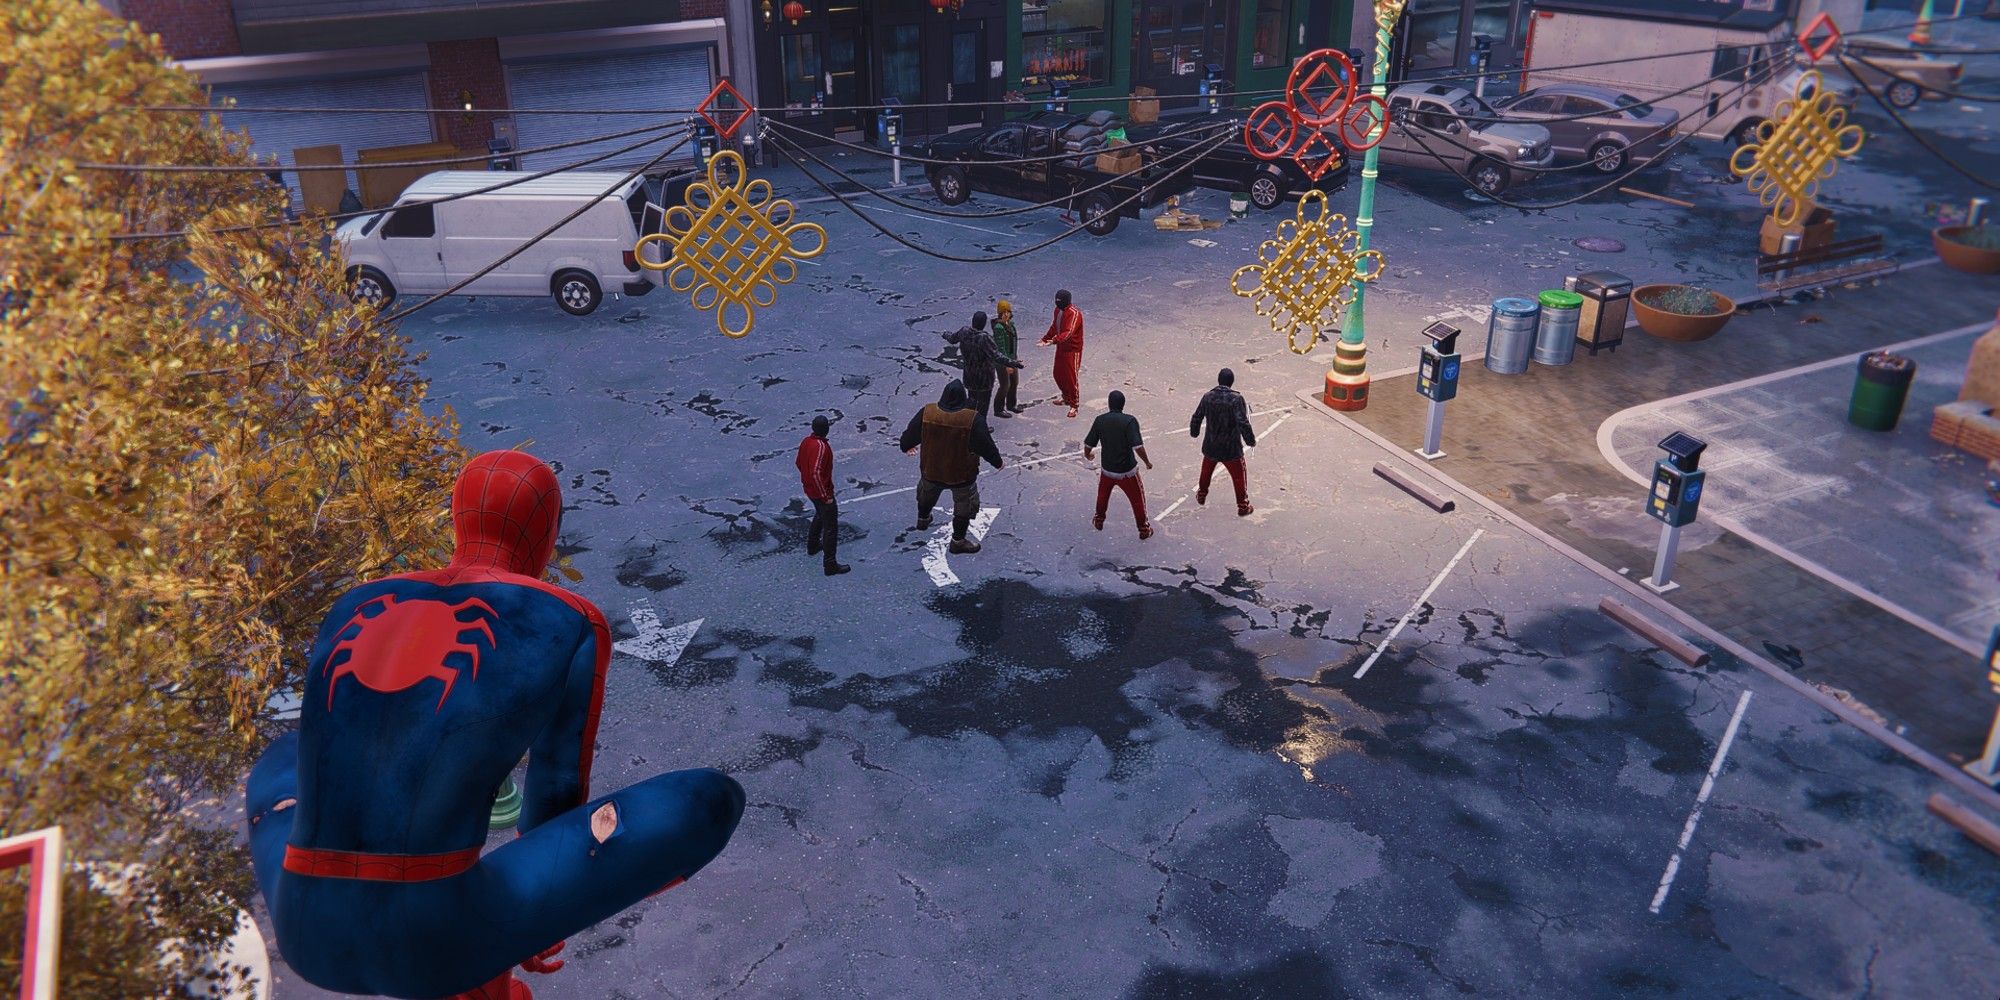 Marvel's Spider-Man Keeping The Peace Quest Civilian Surrounded by Thugs